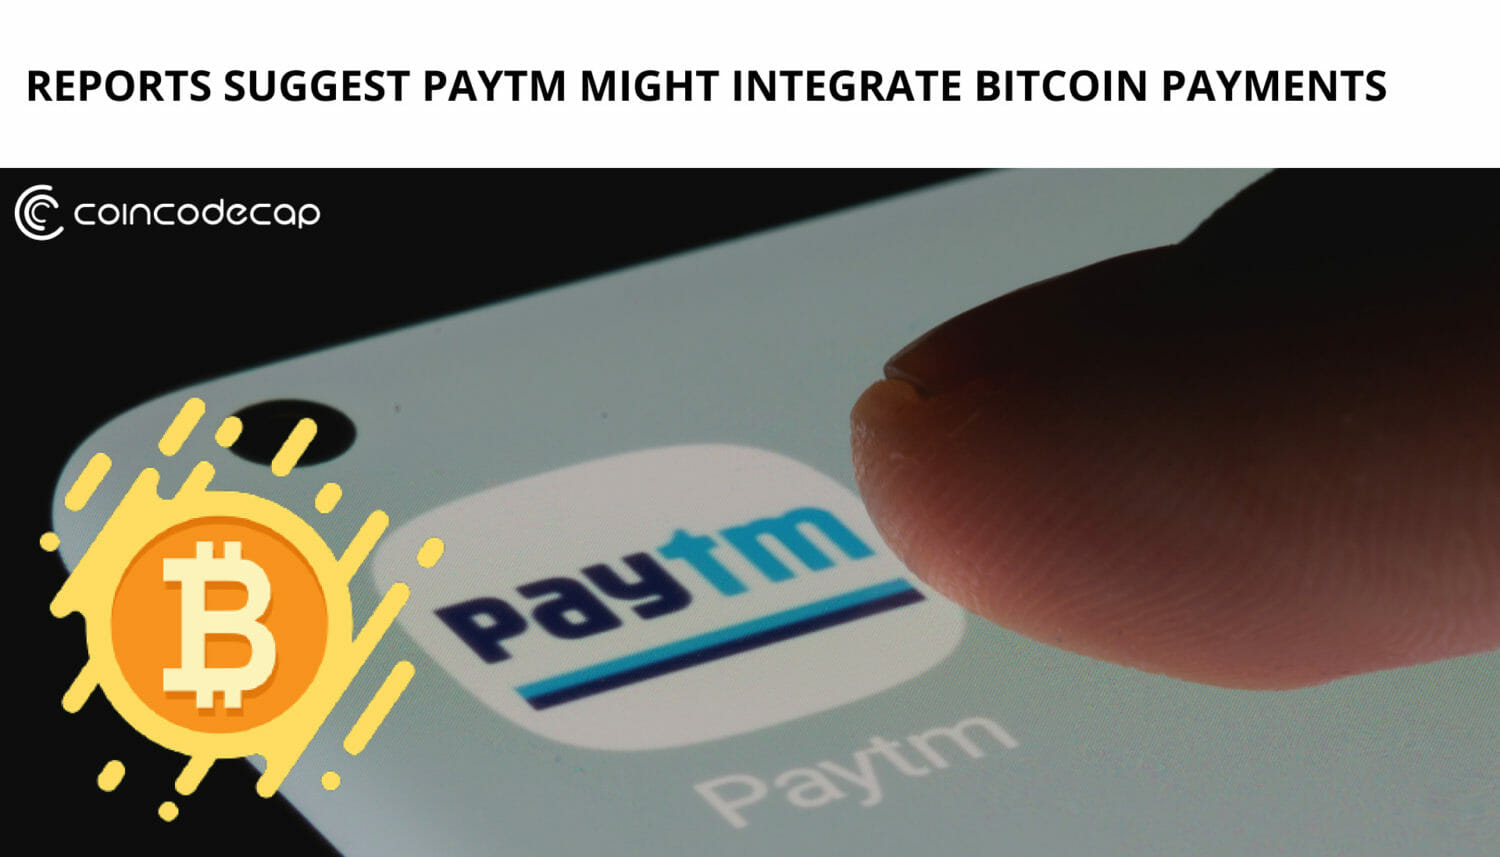 Paytm Might Integrate Bitcoin Payments